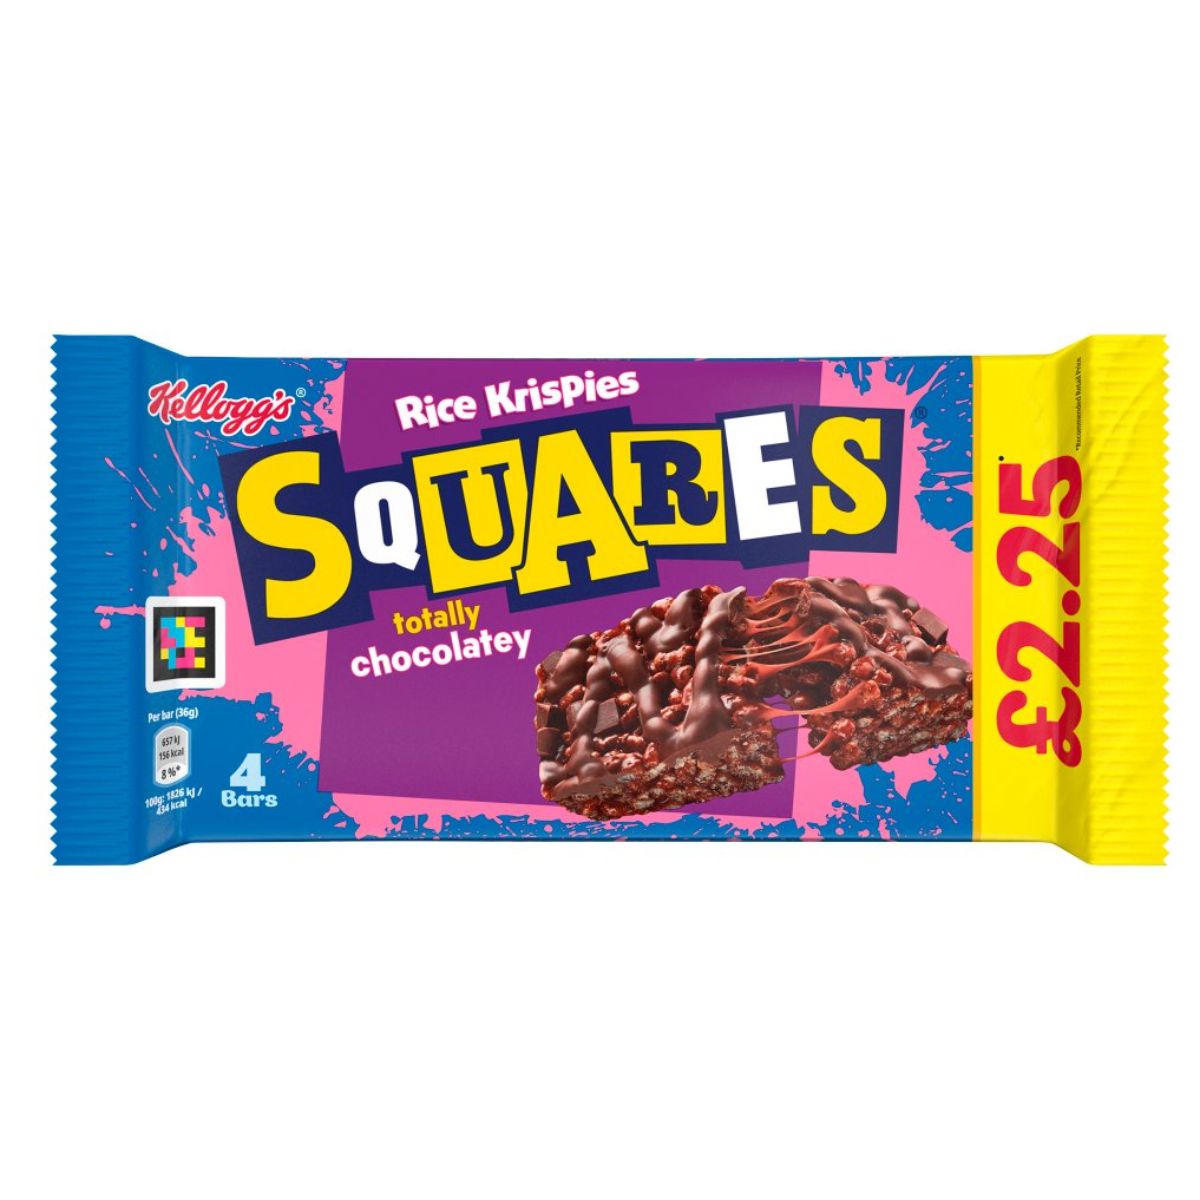 Sentence with replaced product: Package of Kellogg's - Rice Krispies Squares Totally Chocolatey - 4 x 36g, showing a close-up of the bar with a price of £2.25.